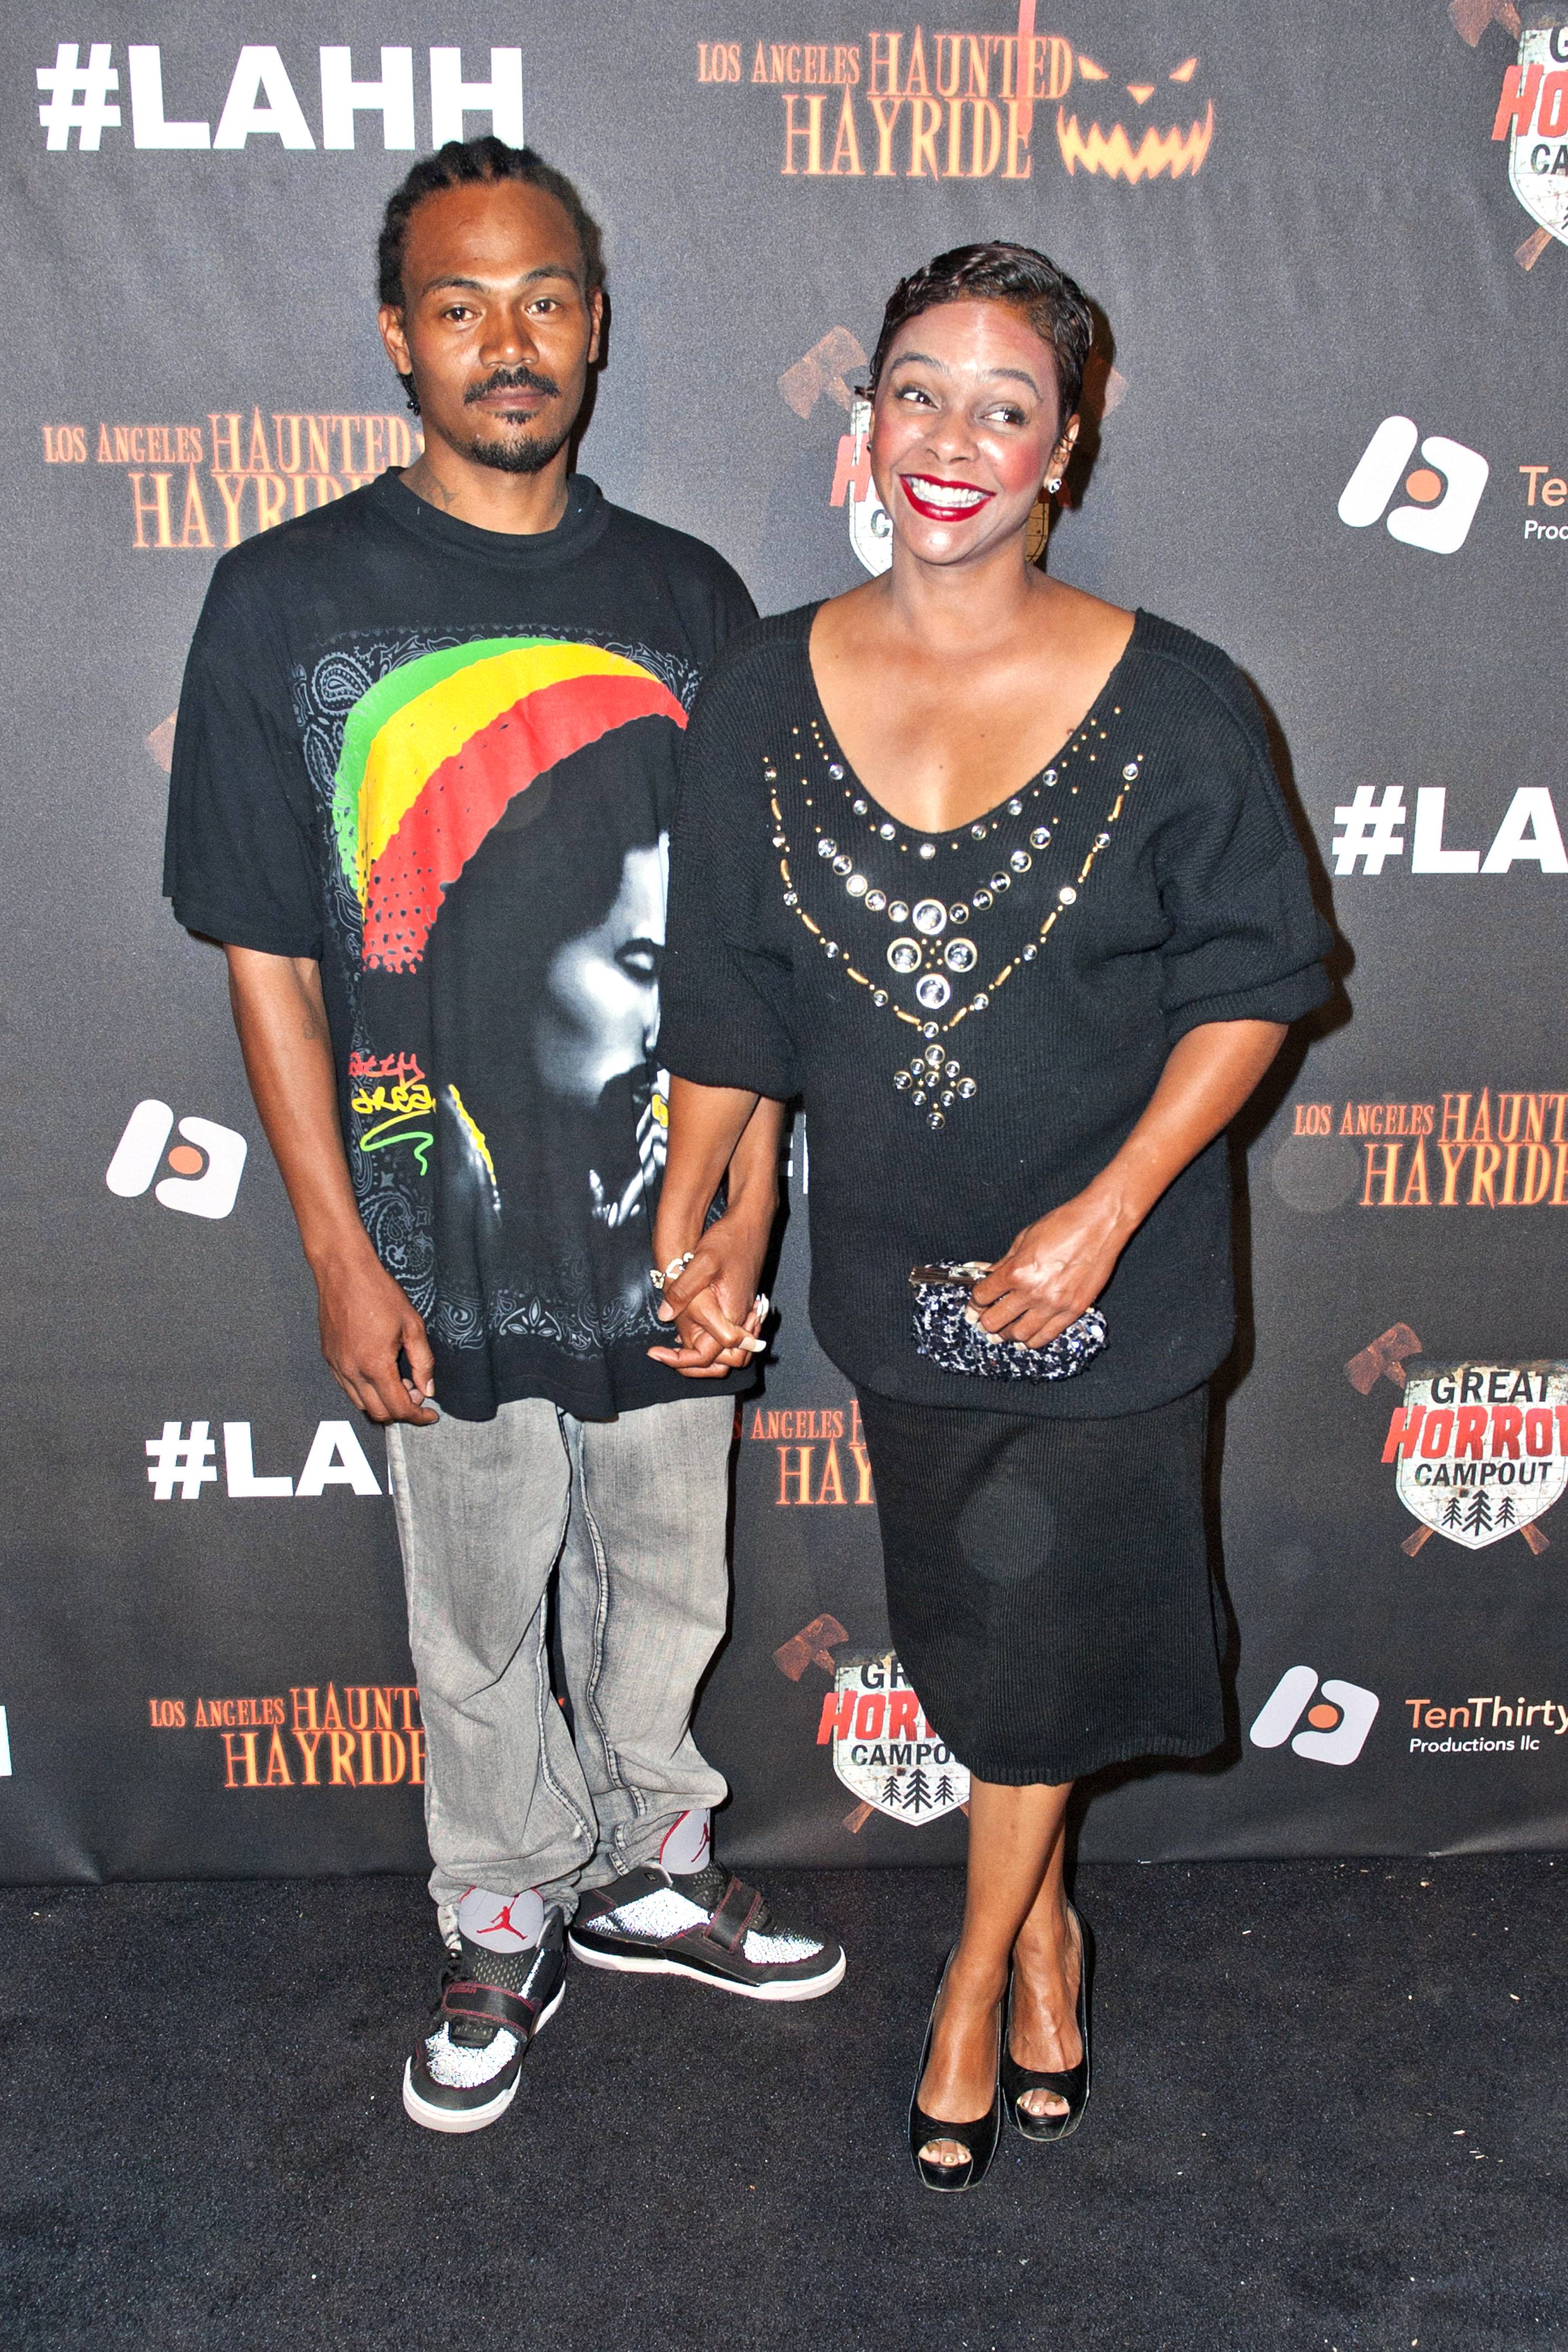 Lark Voorhies and Jimmy Green - The Saved by the Bell actress filed for divorce from alleged former gang member Jimmy Green six months after eloping in Las Vegas. Drama surrounded their marriage after Voorhies’s mother criticized their relationship and ultimately filed a restraining order against Green. Voorhies has requested the court to deny any spousal support for her ex. (Credit: Dave Starbuck/Future Image/WENN.com)